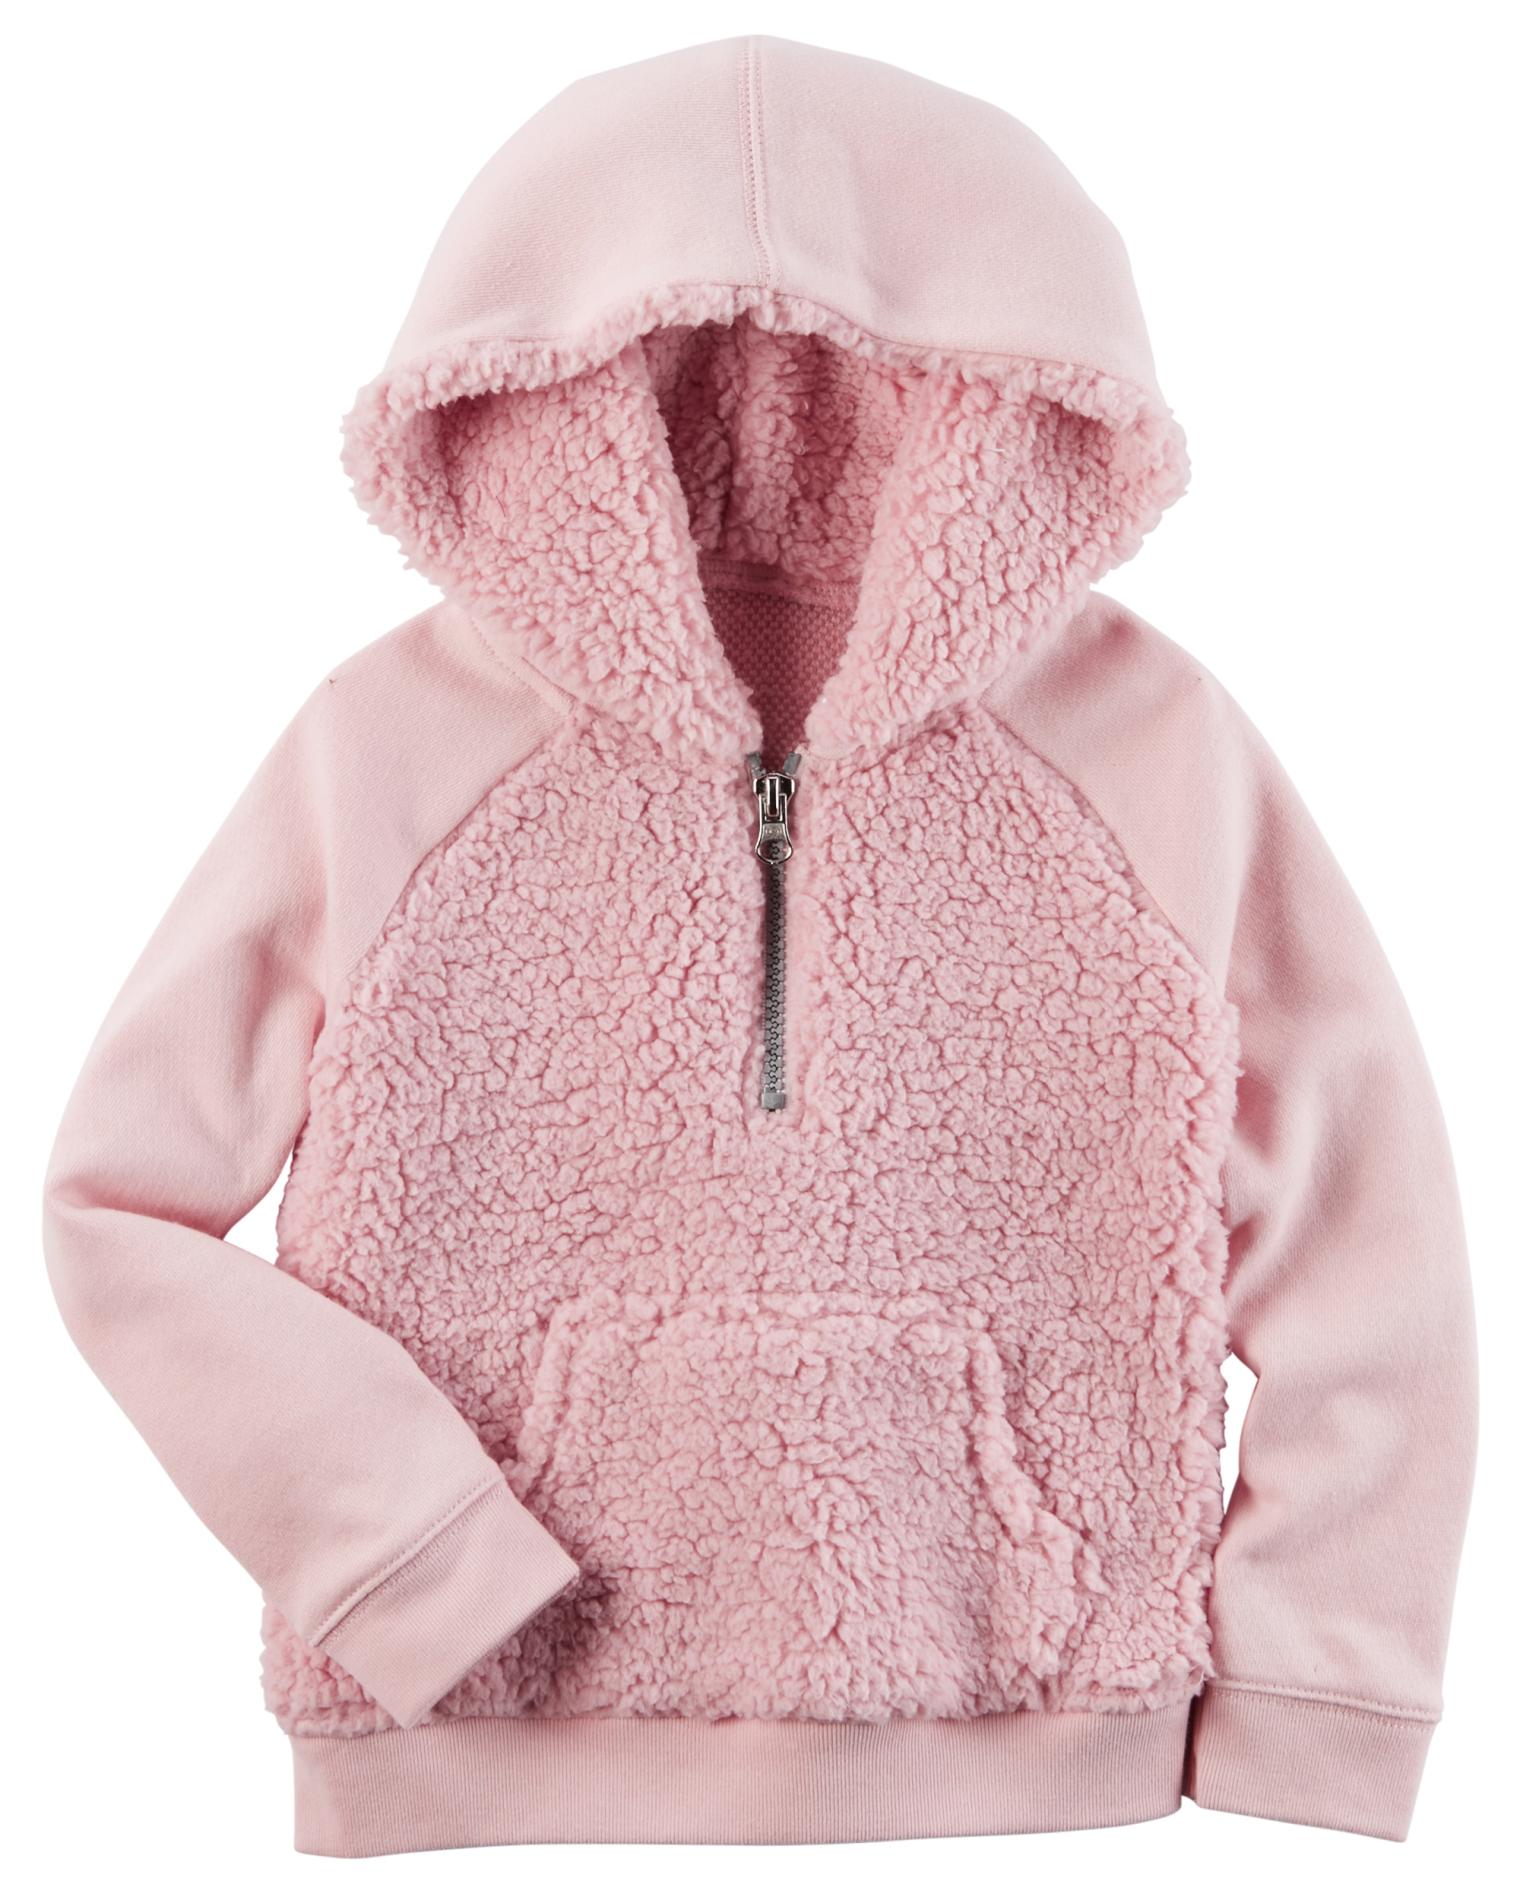 Carter's Toddler Girls' French Terry Knit Hooded Sweatshirt